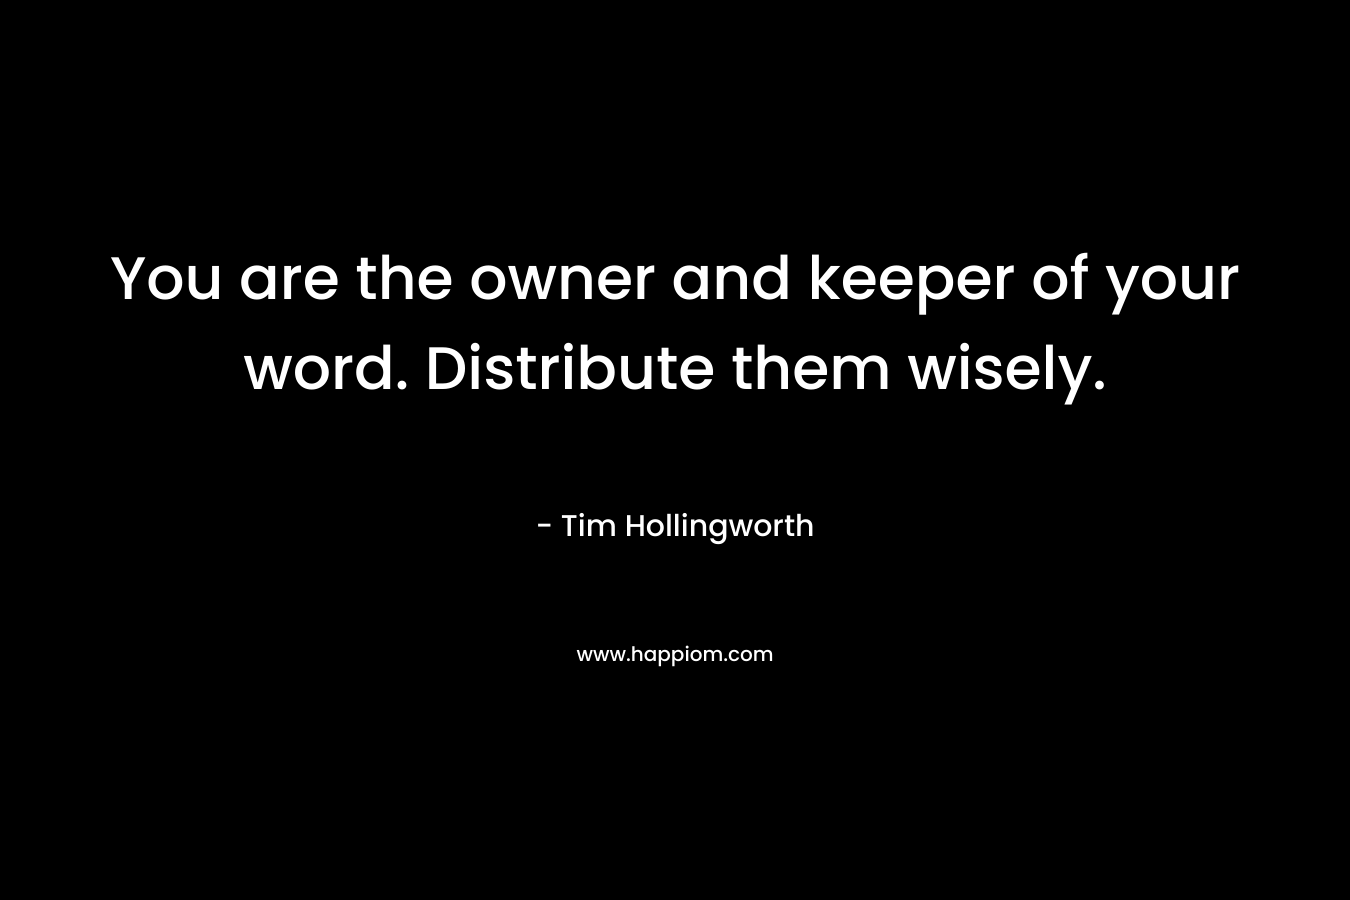 You are the owner and keeper of your word. Distribute them wisely.